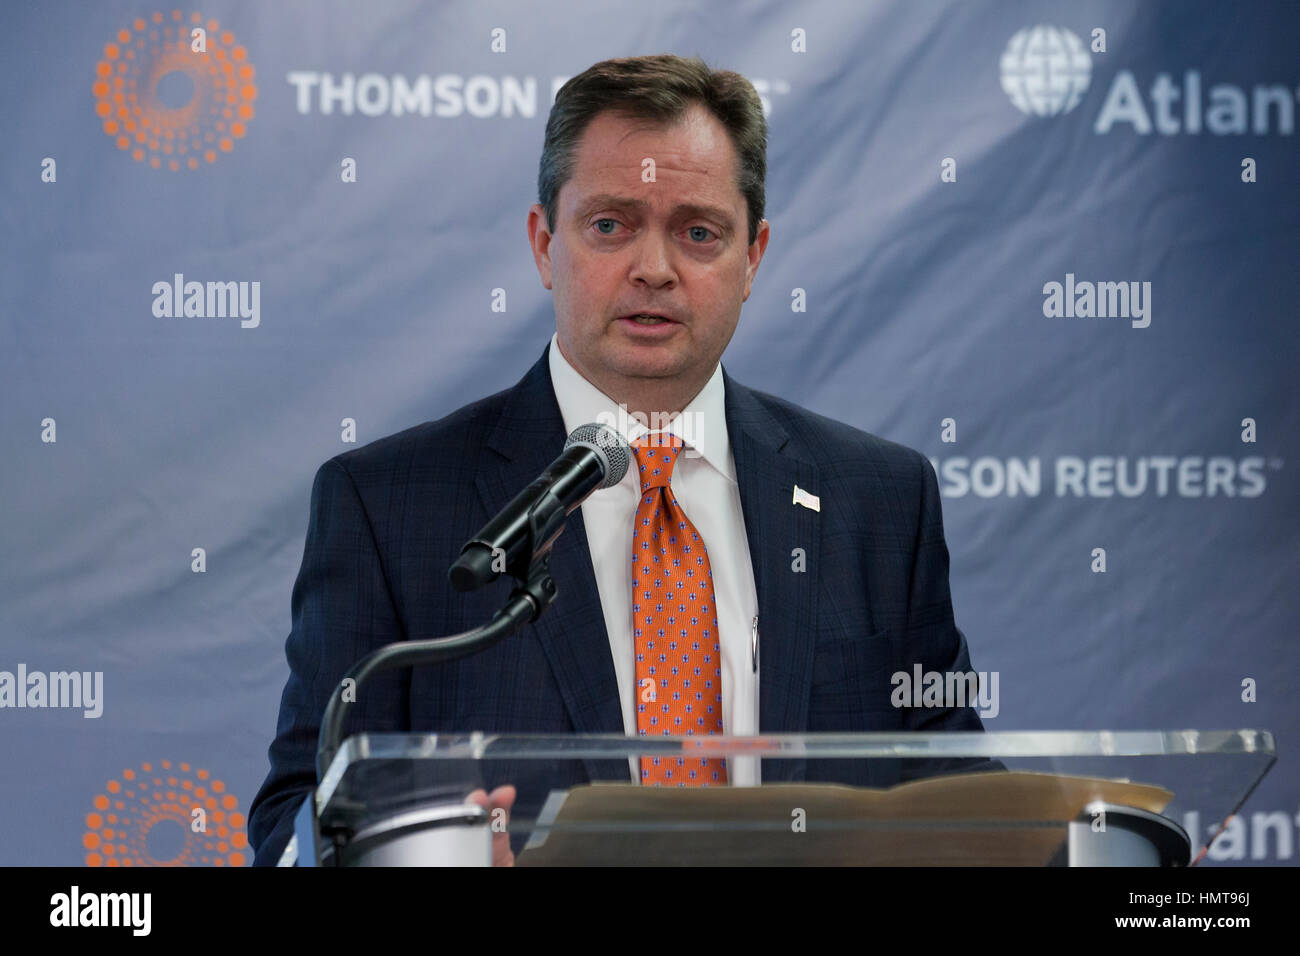 Steve Rubley, Thomson Reuters Special Services CEO Stock Photo